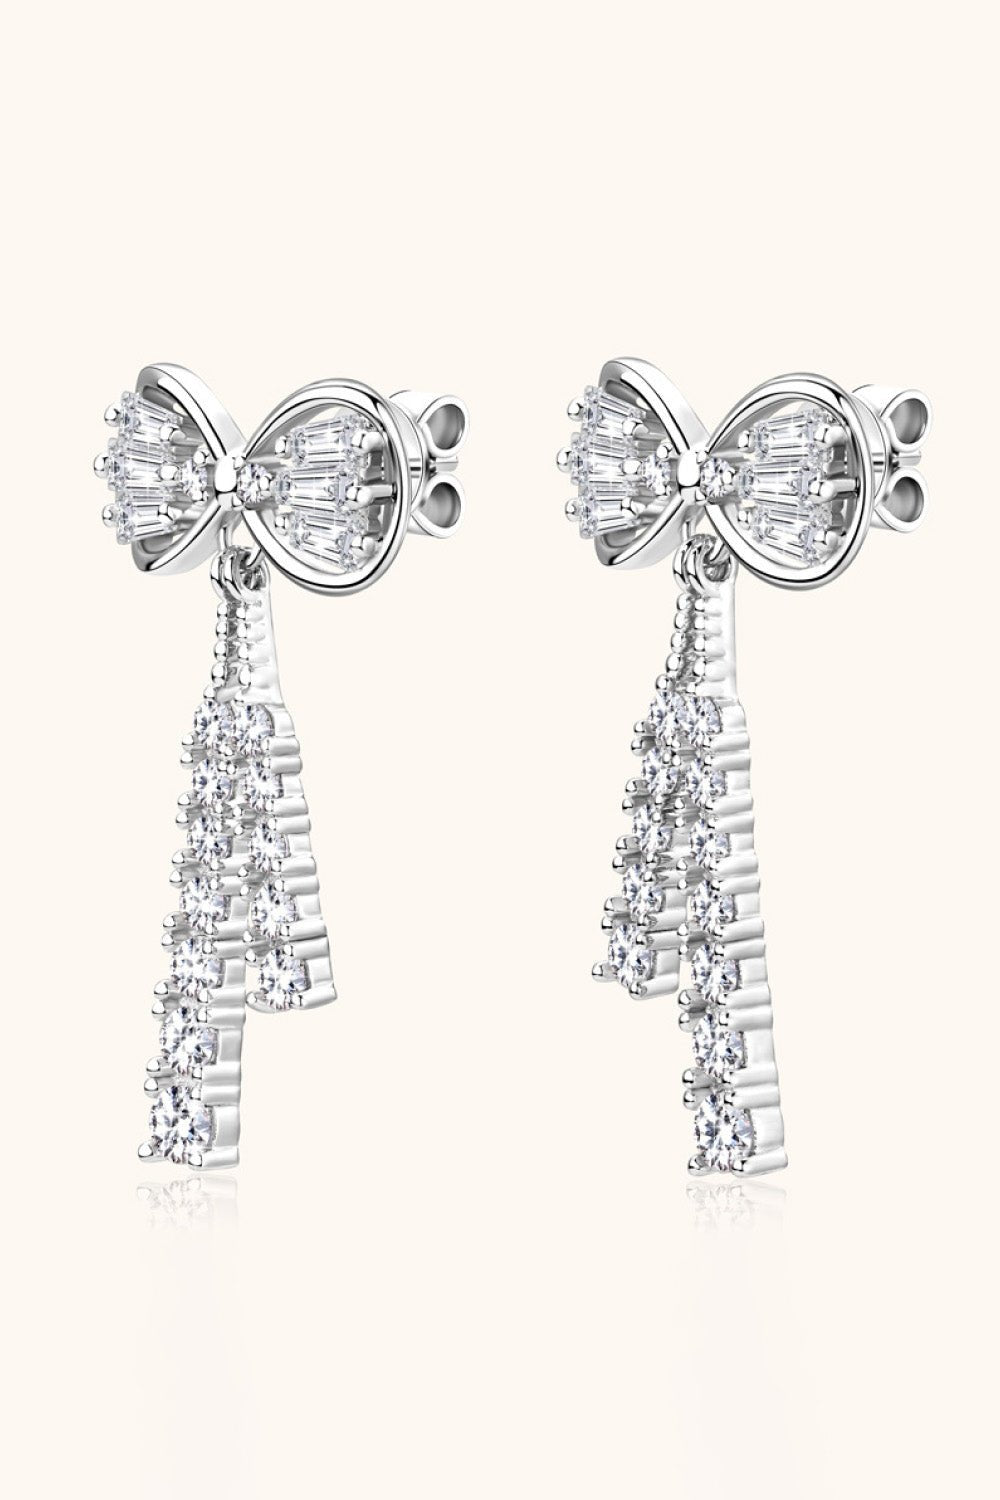 1.12 Carat Moissanite 925 Sterling Silver Bow Earrings - Uylee's Boutique